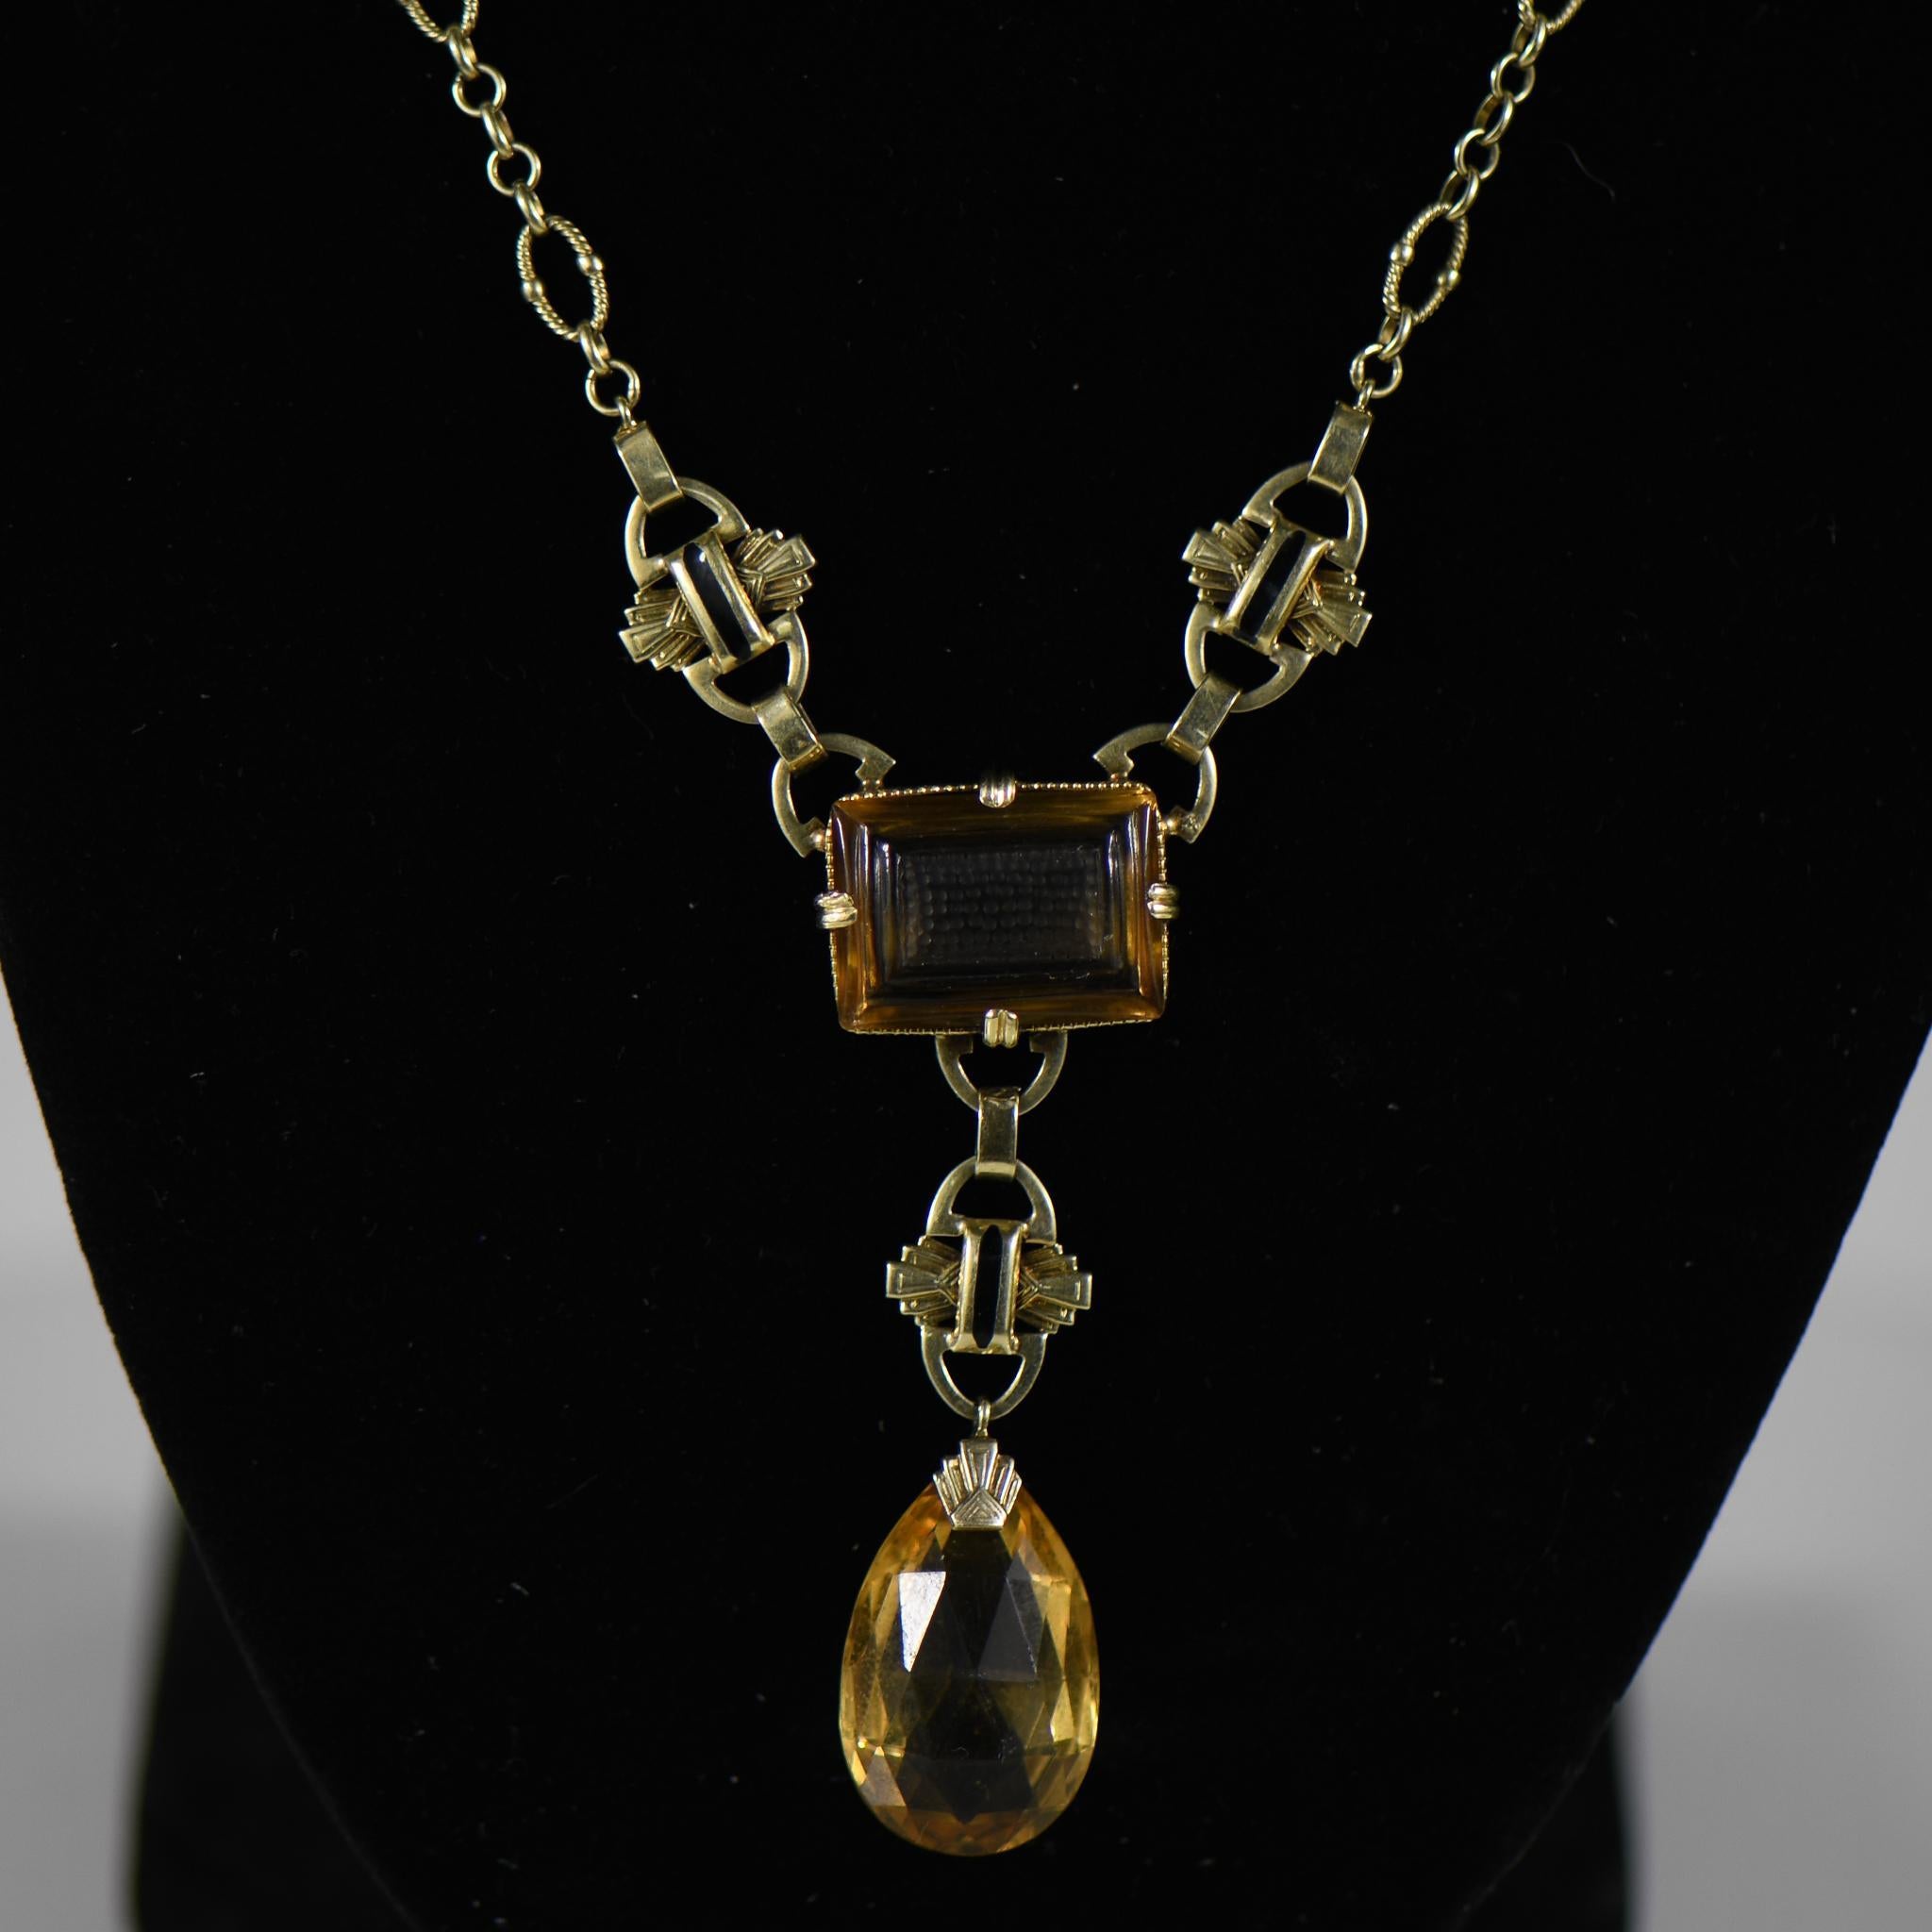 Crafted in the opulent style of Art Deco, this exquisite citrine necklace exudes timeless elegance. The centerpiece features a stunning portrait-cut citrine, meticulously carved to capture intricate details and depth, evoking a sense of